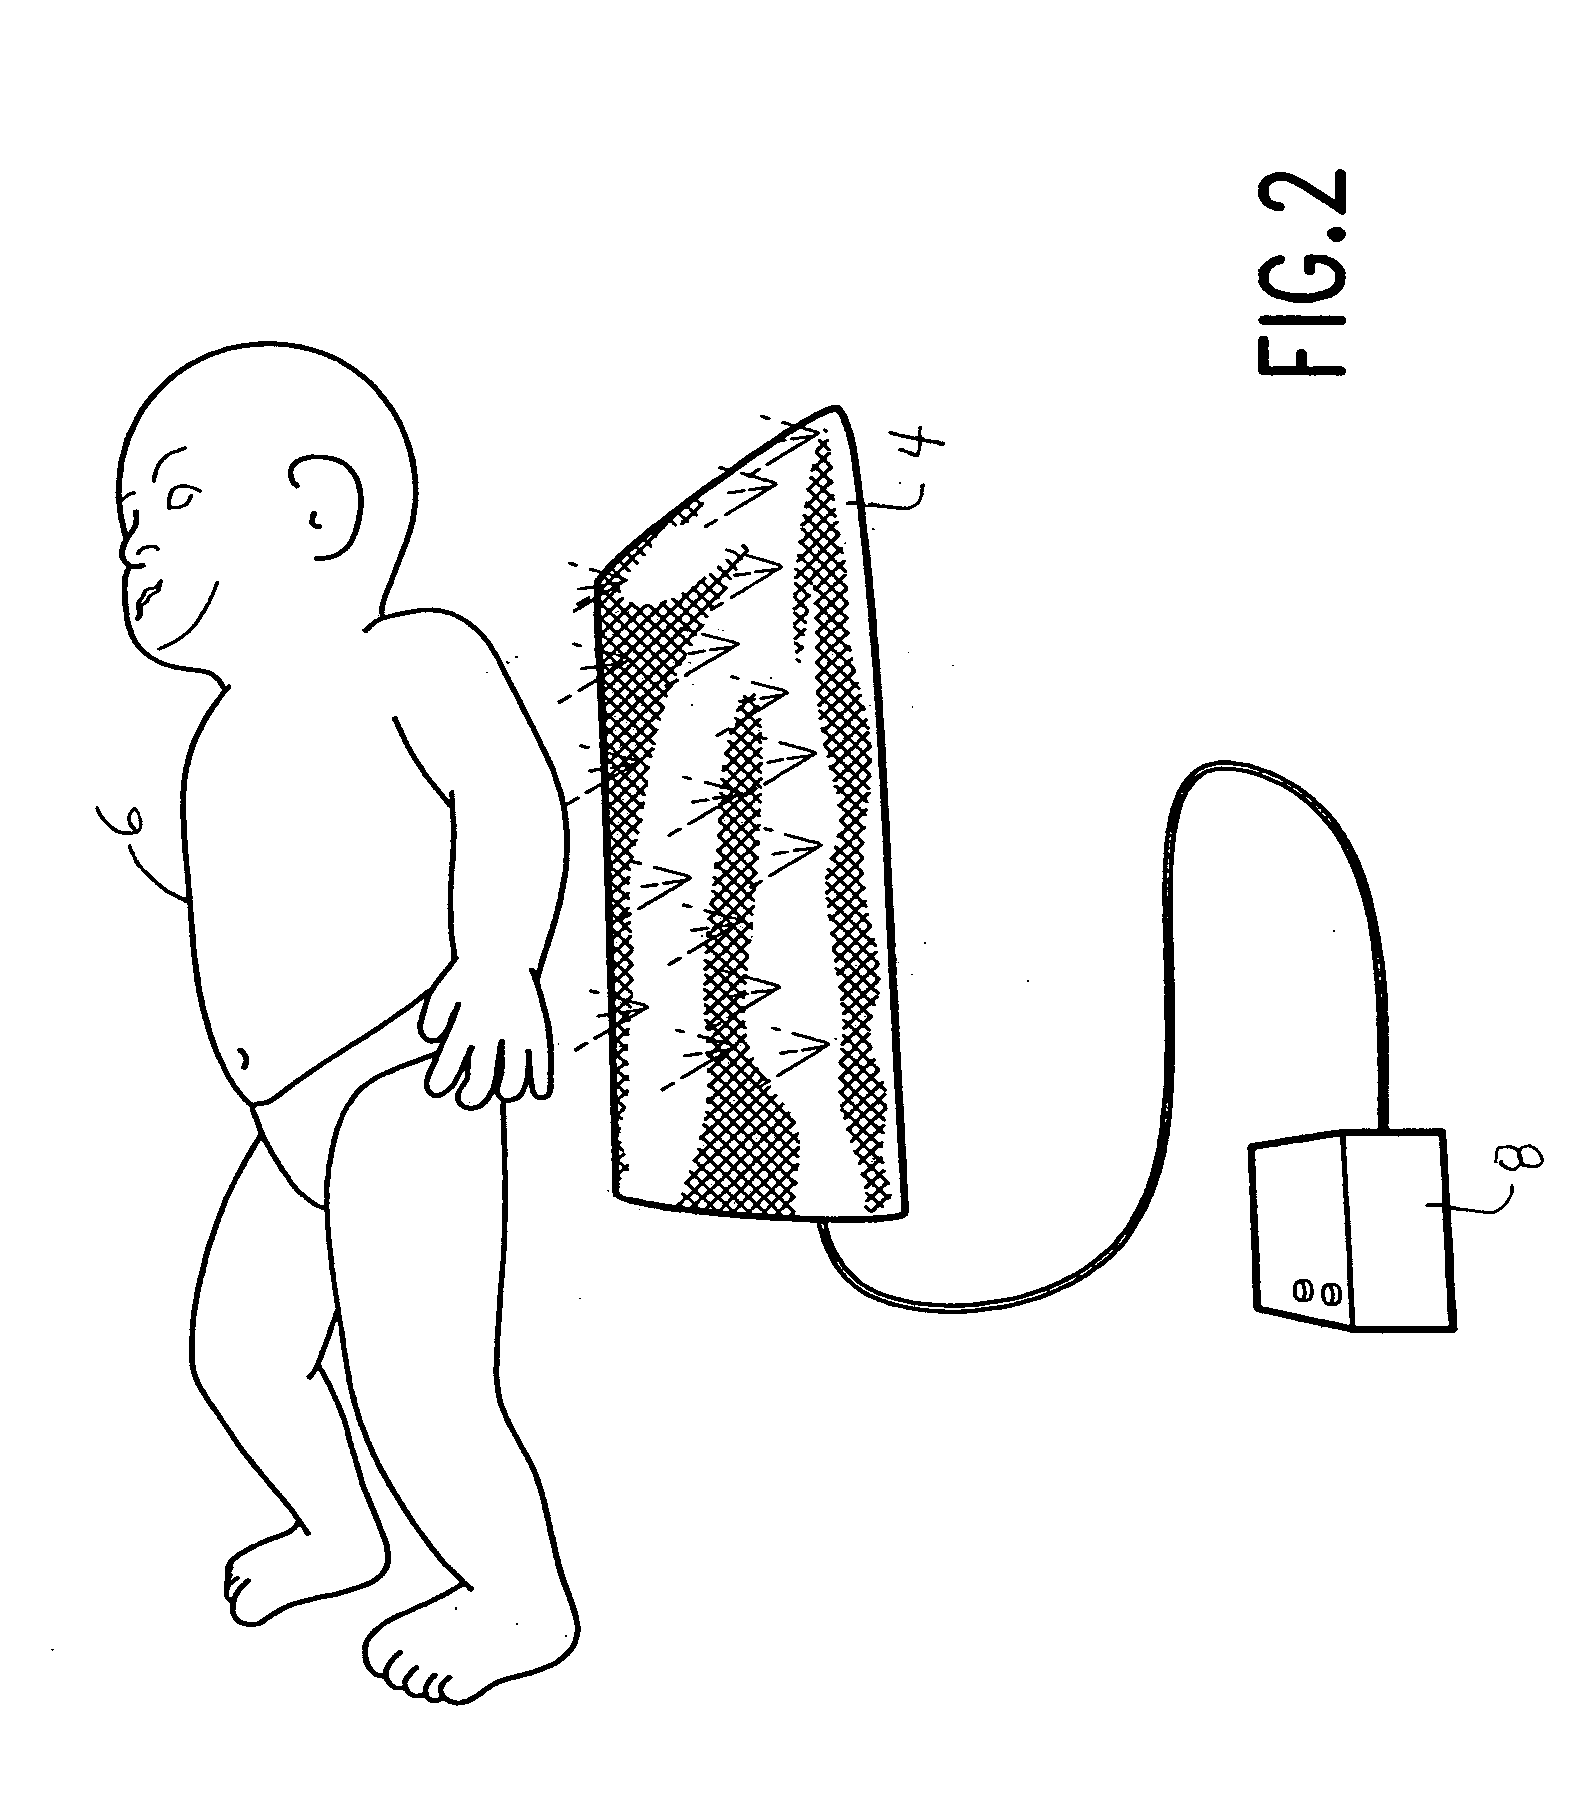 Device and method for phototherapy of jaundiced infants